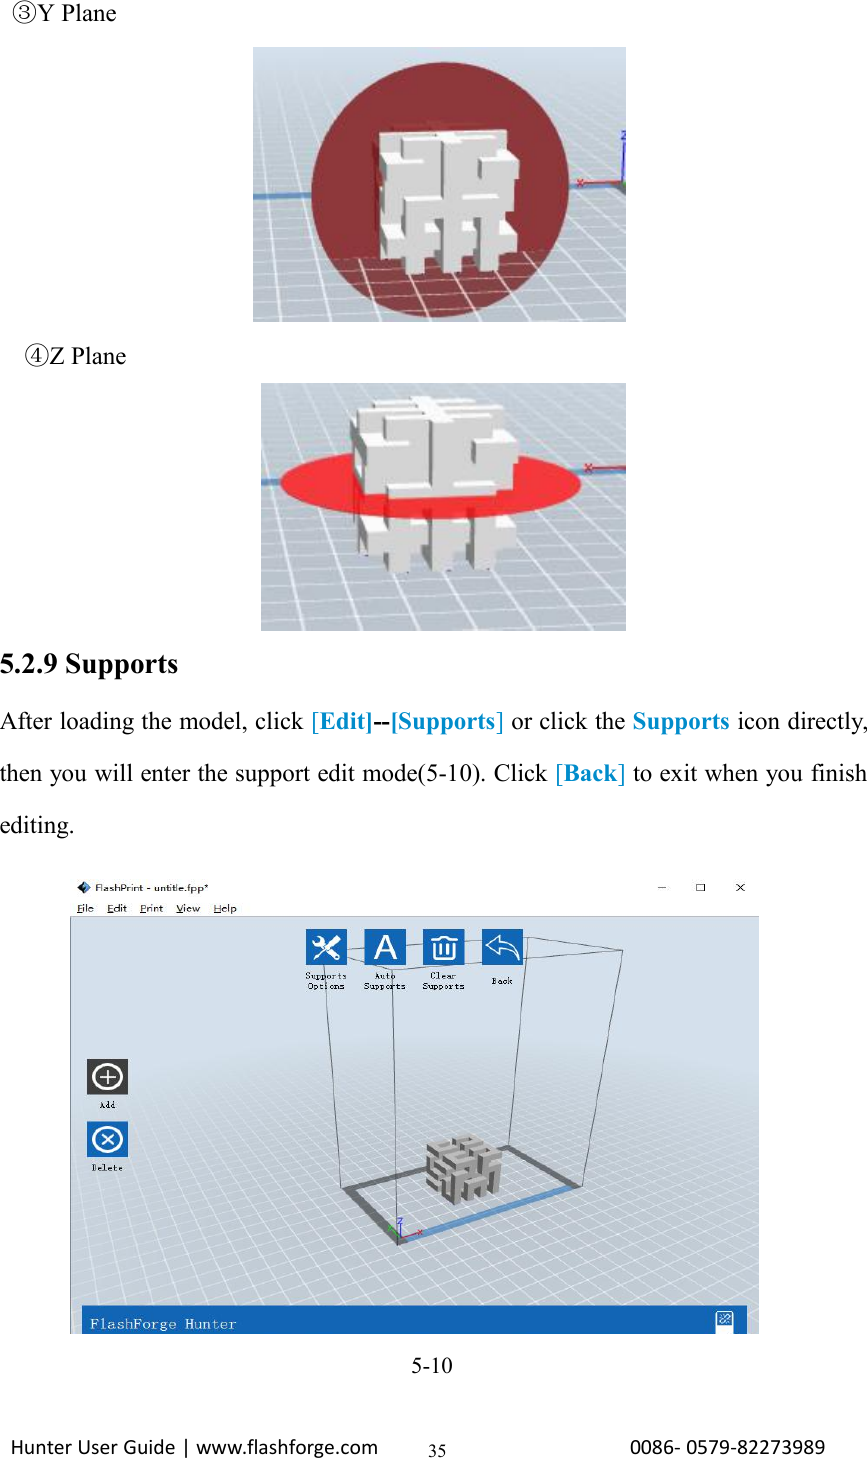 Hunter User Guide | www.flashforge.com 0086- 0579-8227398935③Y Plane④Z Plane5.2.9 SupportsAfter loading the model, click [Edit]--[Supports]or click the Supports icon directly,then you will enter the support edit mode(5-10). Click [Back]to exit when you finishediting.5-10